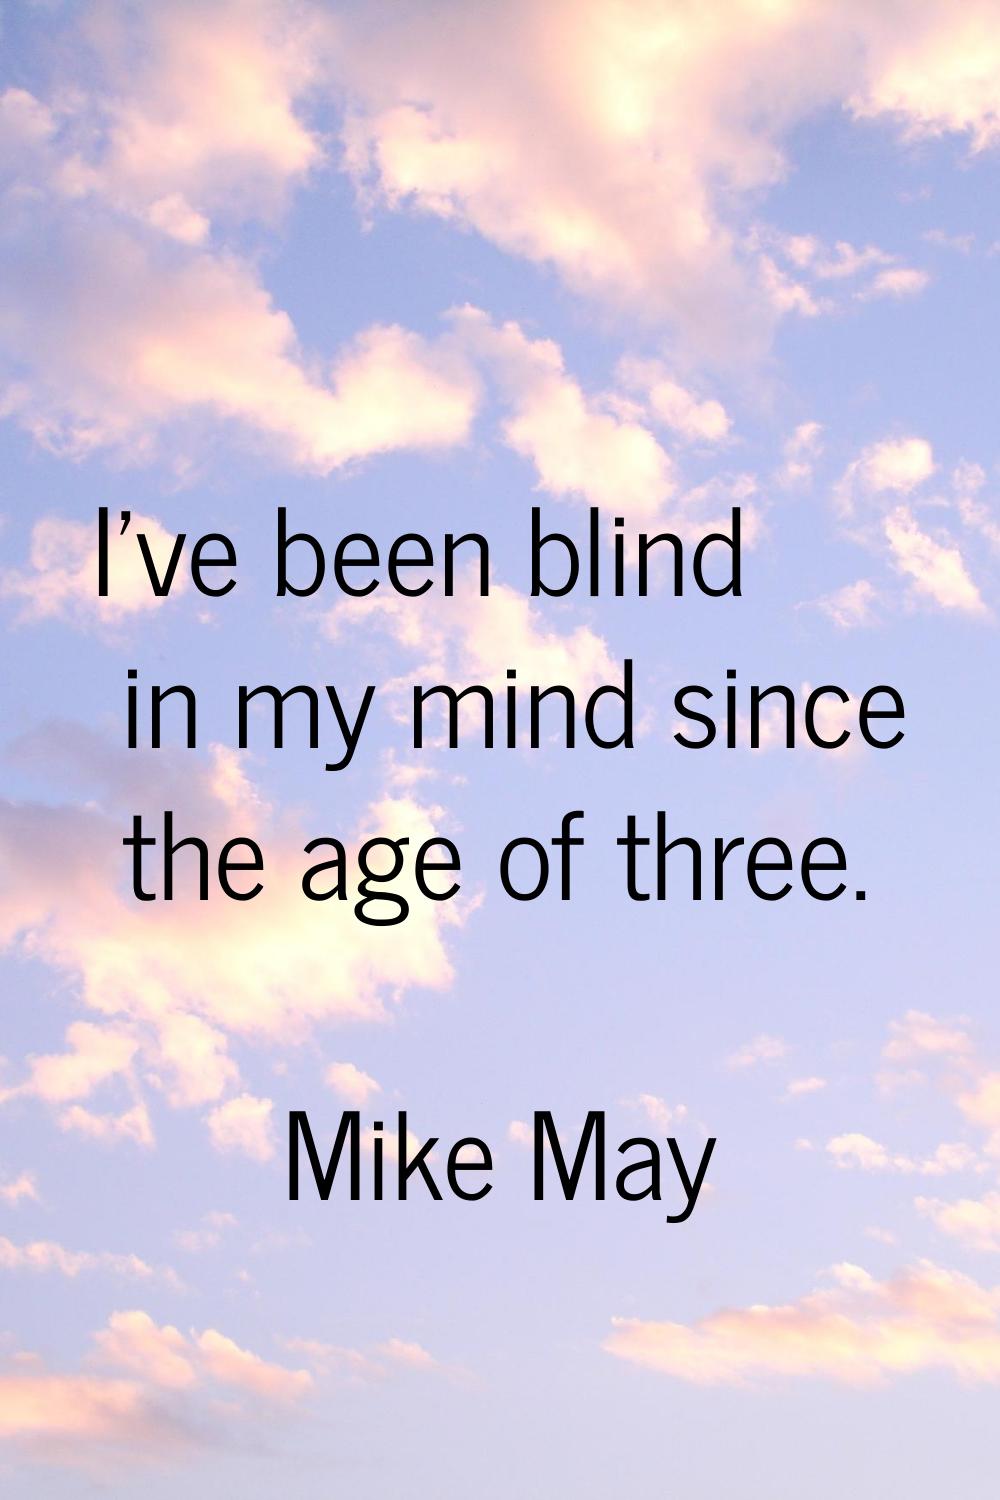 I've been blind in my mind since the age of three.